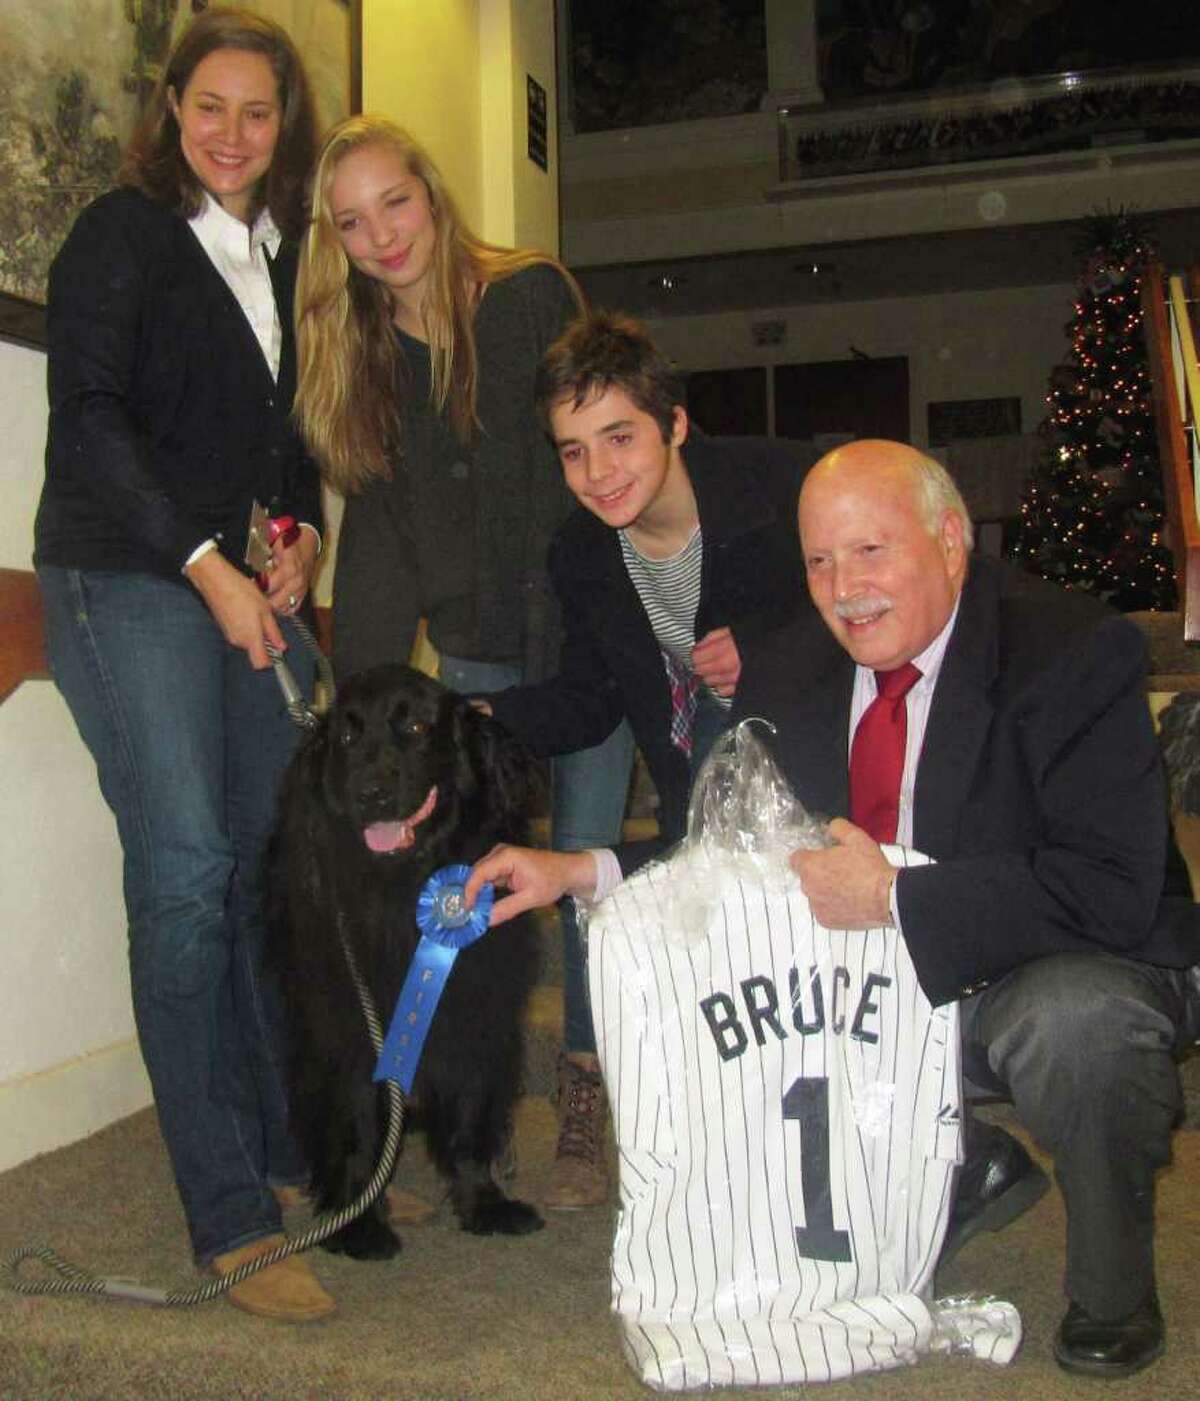 Bruce, a 150-pound Lab-Newfoundland mix, won Westport Animal Shelter Advocates' "Top Dog" contest Thursday afternoon. From left to right is owner Jennifer Purdy, Purdy's daughter Tova, son Declan and First Selectman Gordon Joseloff.